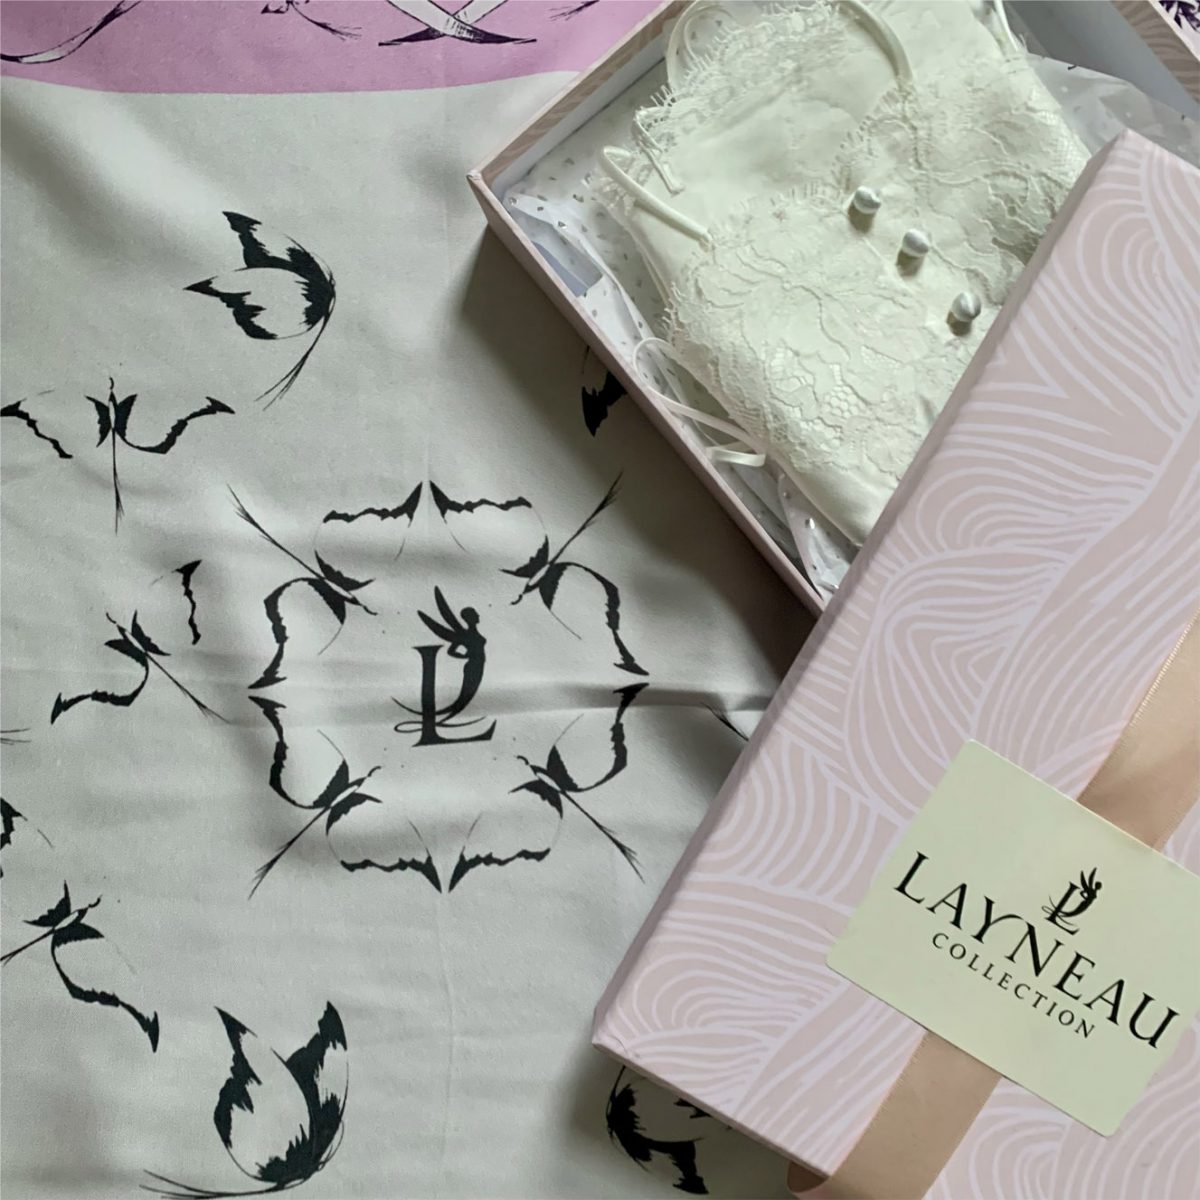 Layneau lingerie in gift box with silk scarf